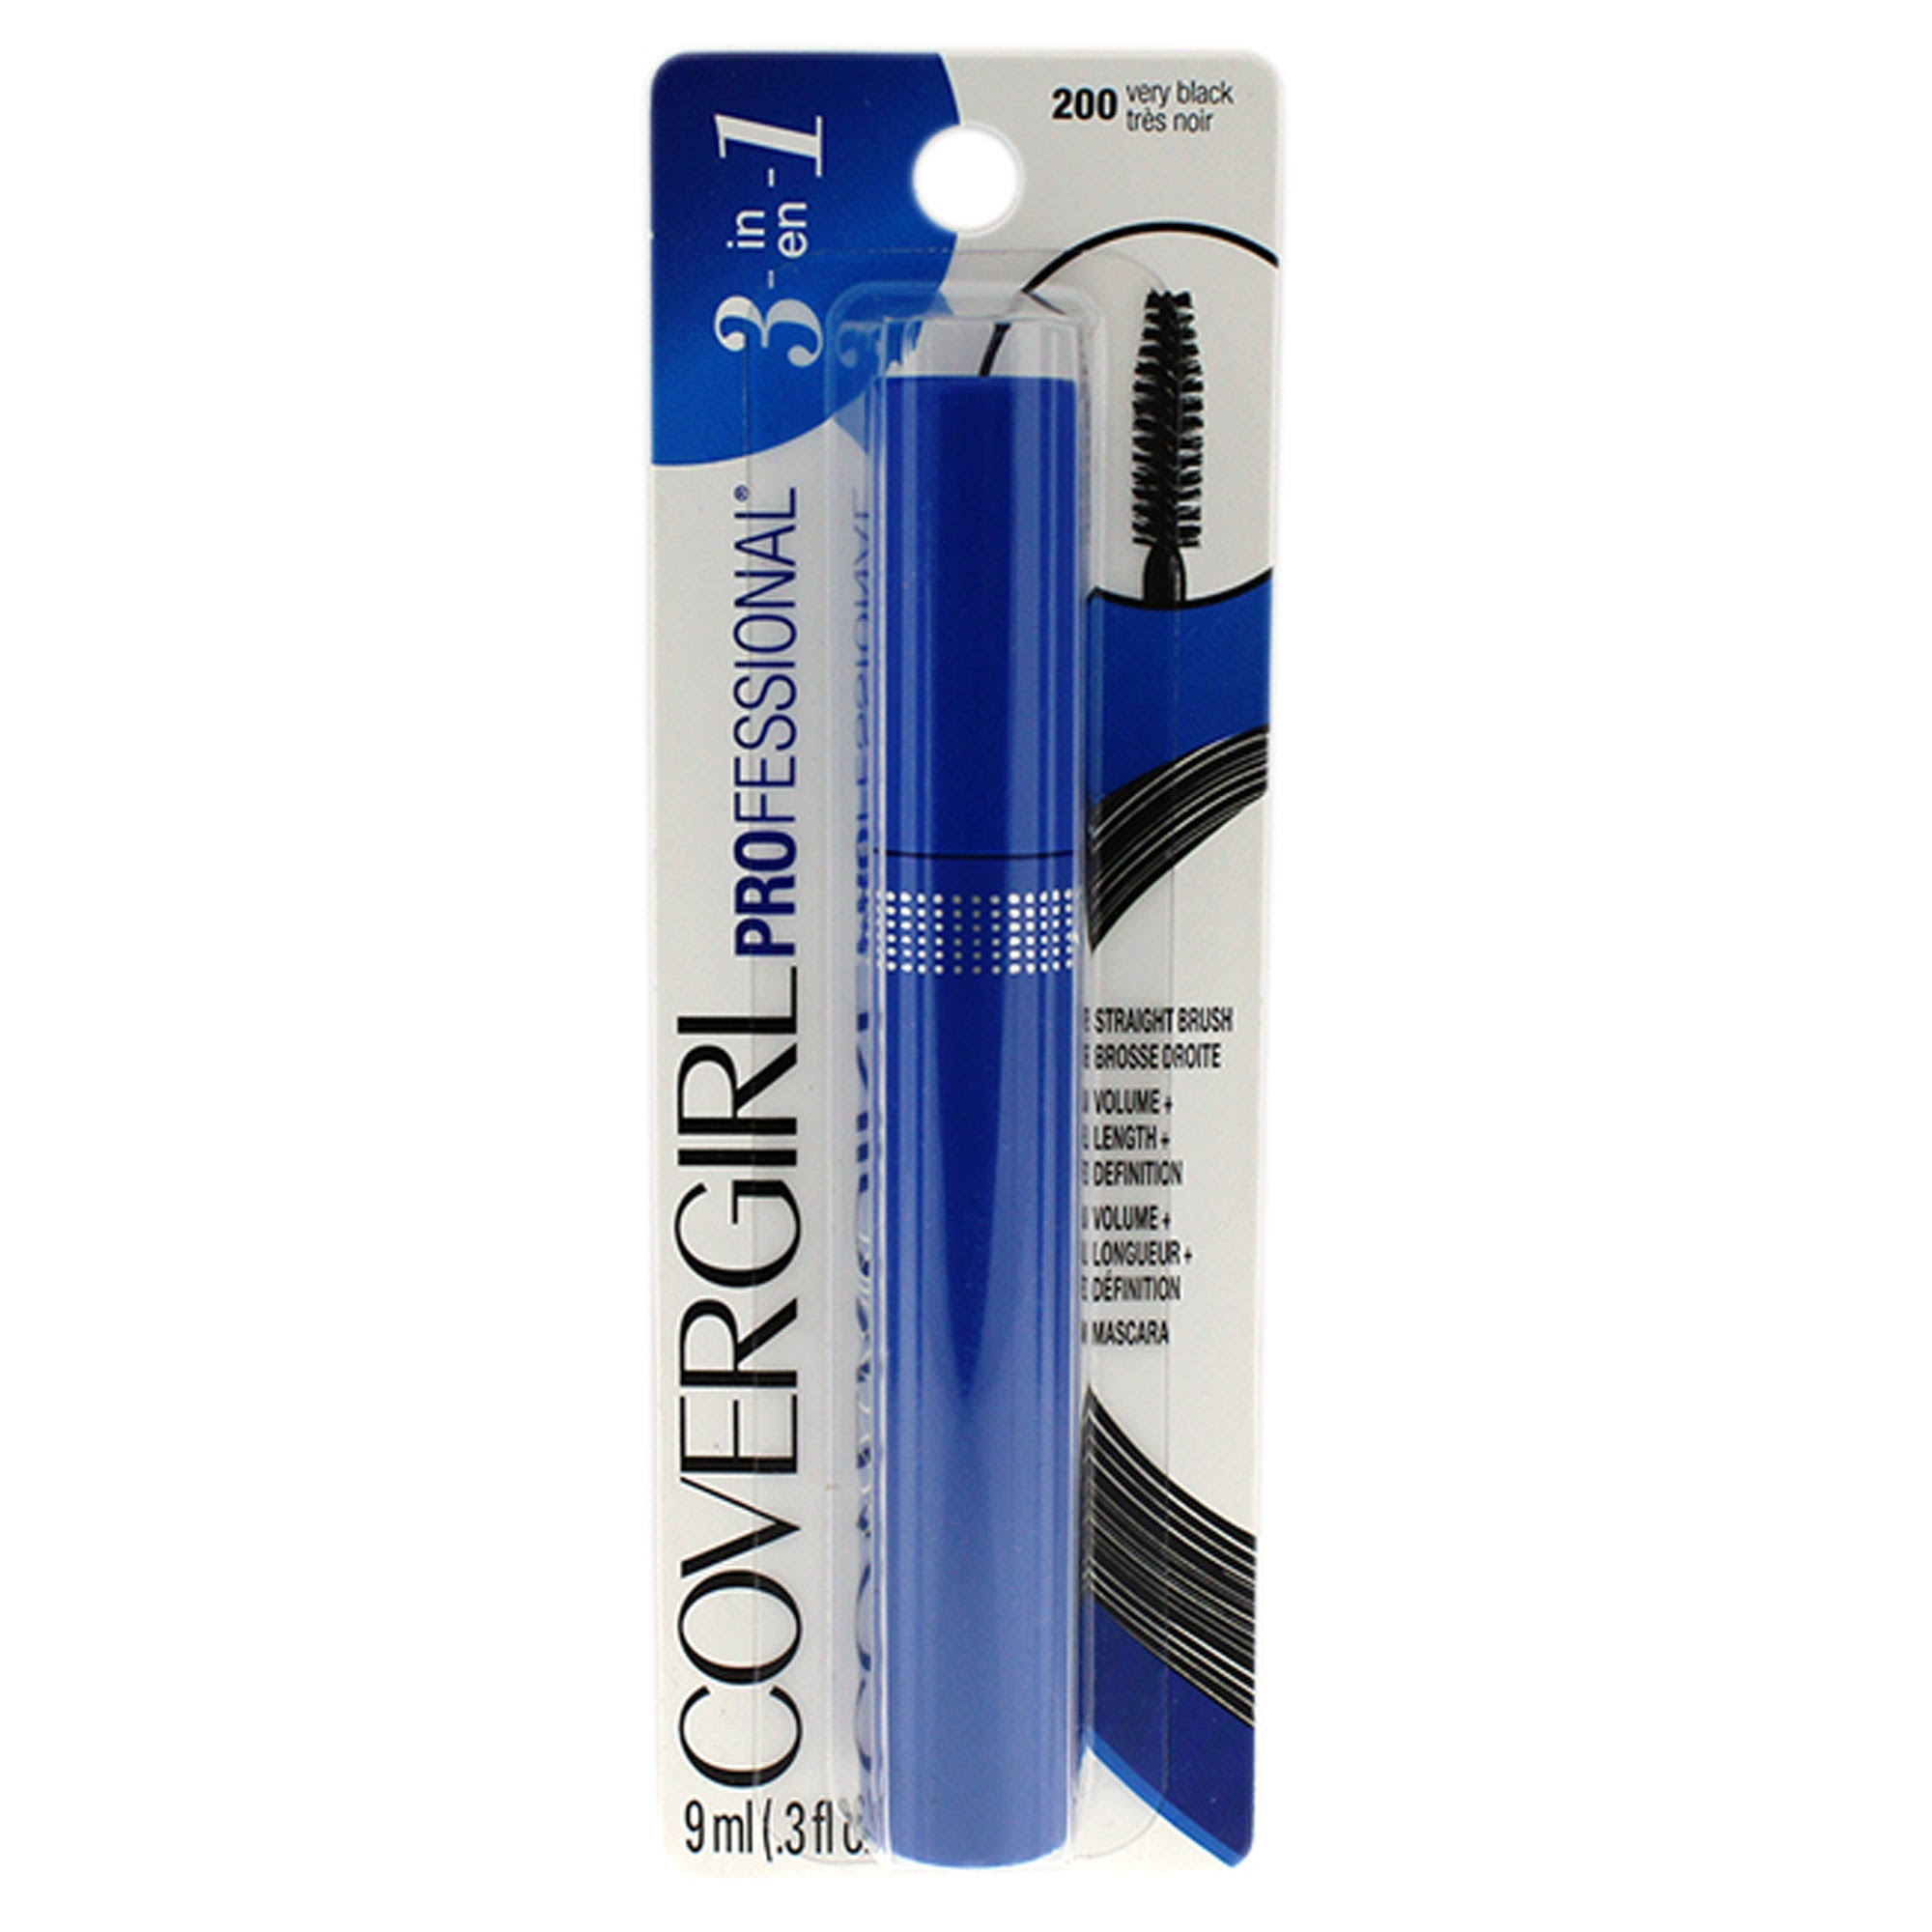 Covergirl Professional 3 in 1 Mascara - 200 Very Black